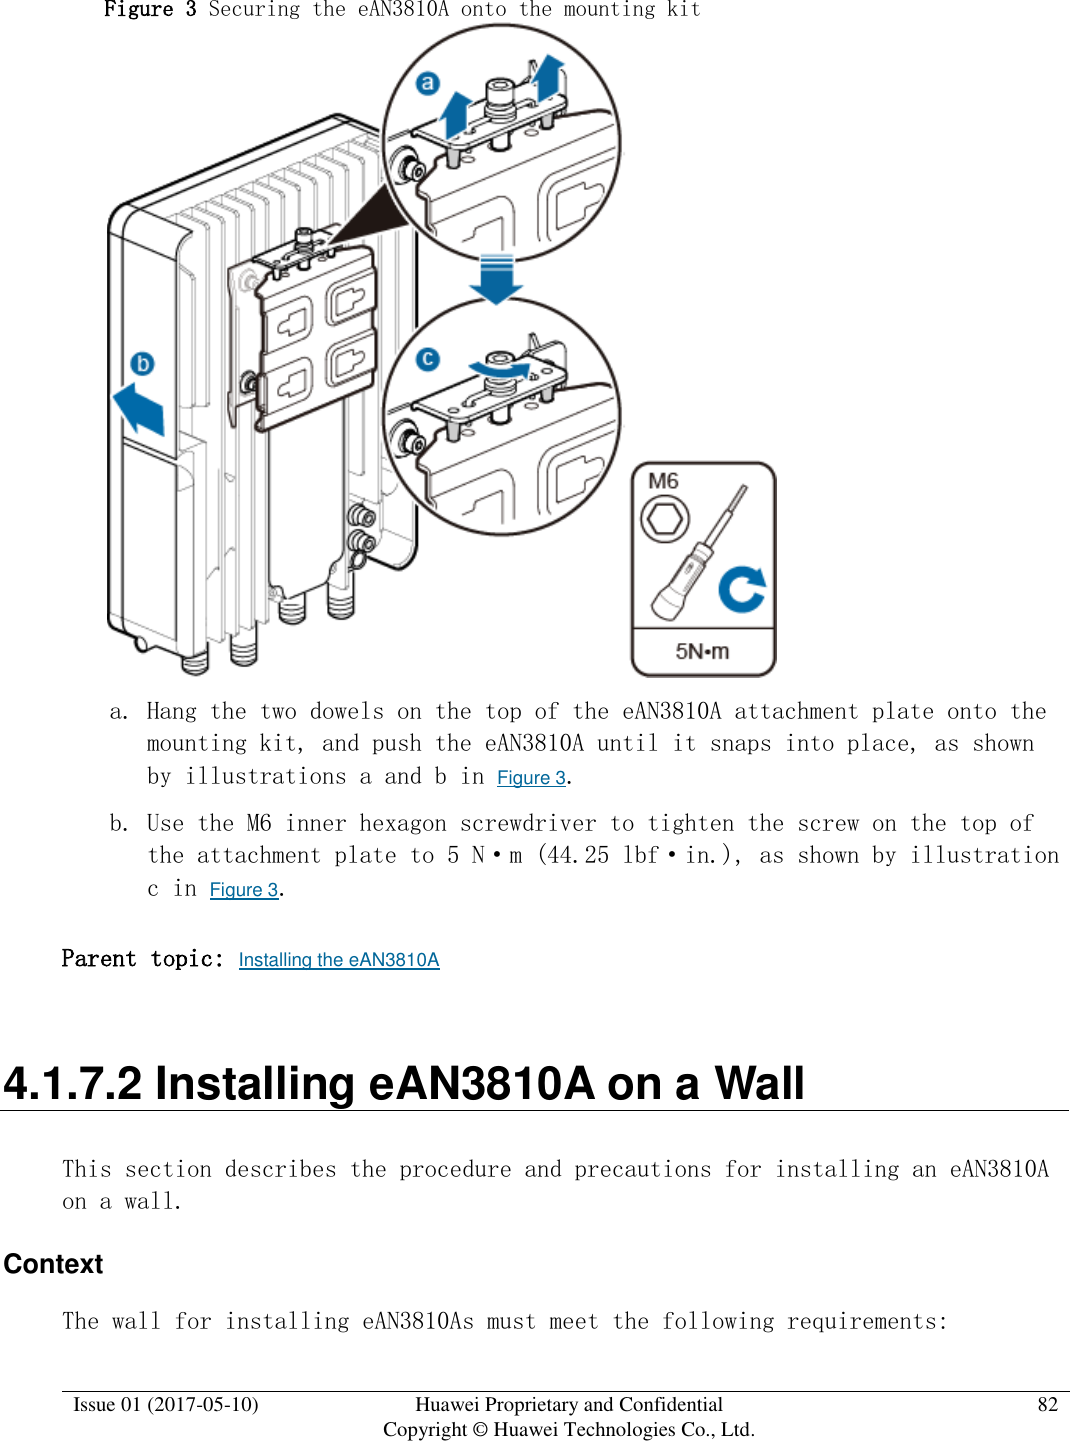  Issue 01 (2017-05-10) Huawei Proprietary and Confidential      Copyright © Huawei Technologies Co., Ltd. 82  Figure 3 Securing the eAN3810A onto the mounting kit   a. Hang the two dowels on the top of the eAN3810A attachment plate onto the mounting kit, and push the eAN3810A until it snaps into place, as shown by illustrations a and b in Figure 3. b. Use the M6 inner hexagon screwdriver to tighten the screw on the top of the attachment plate to 5 N·m (44.25 lbf·in.), as shown by illustration c in Figure 3.  Parent topic: Installing the eAN3810A 4.1.7.2 Installing eAN3810A on a Wall This section describes the procedure and precautions for installing an eAN3810A on a wall. Context The wall for installing eAN3810As must meet the following requirements: 